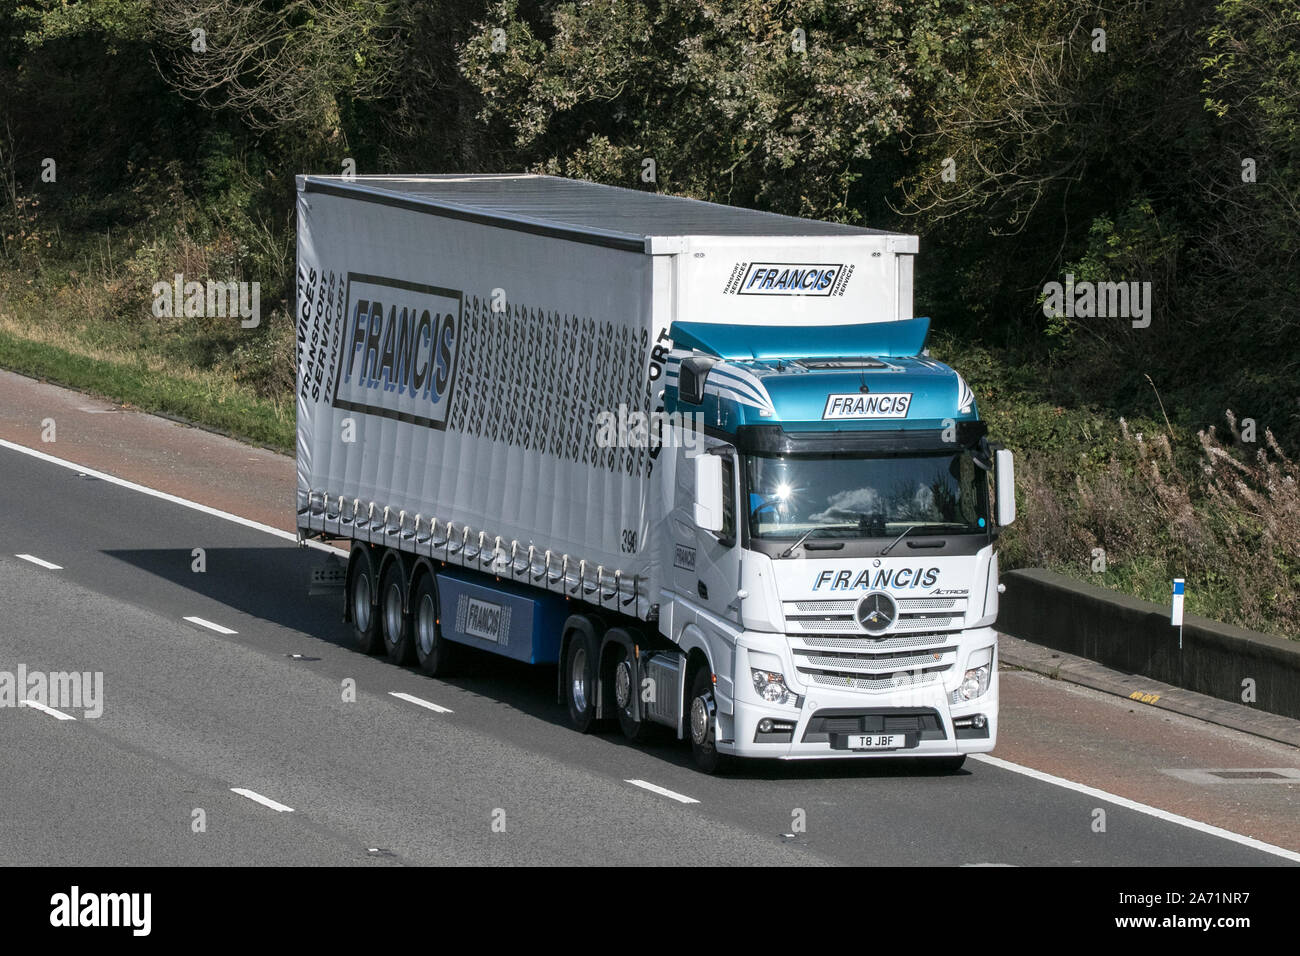 Francis transport Mercedes Actros Haulage delivery trucks, lorry, transportation, truck, cargo, vehicle, delivery, commercial transport Stock Photo